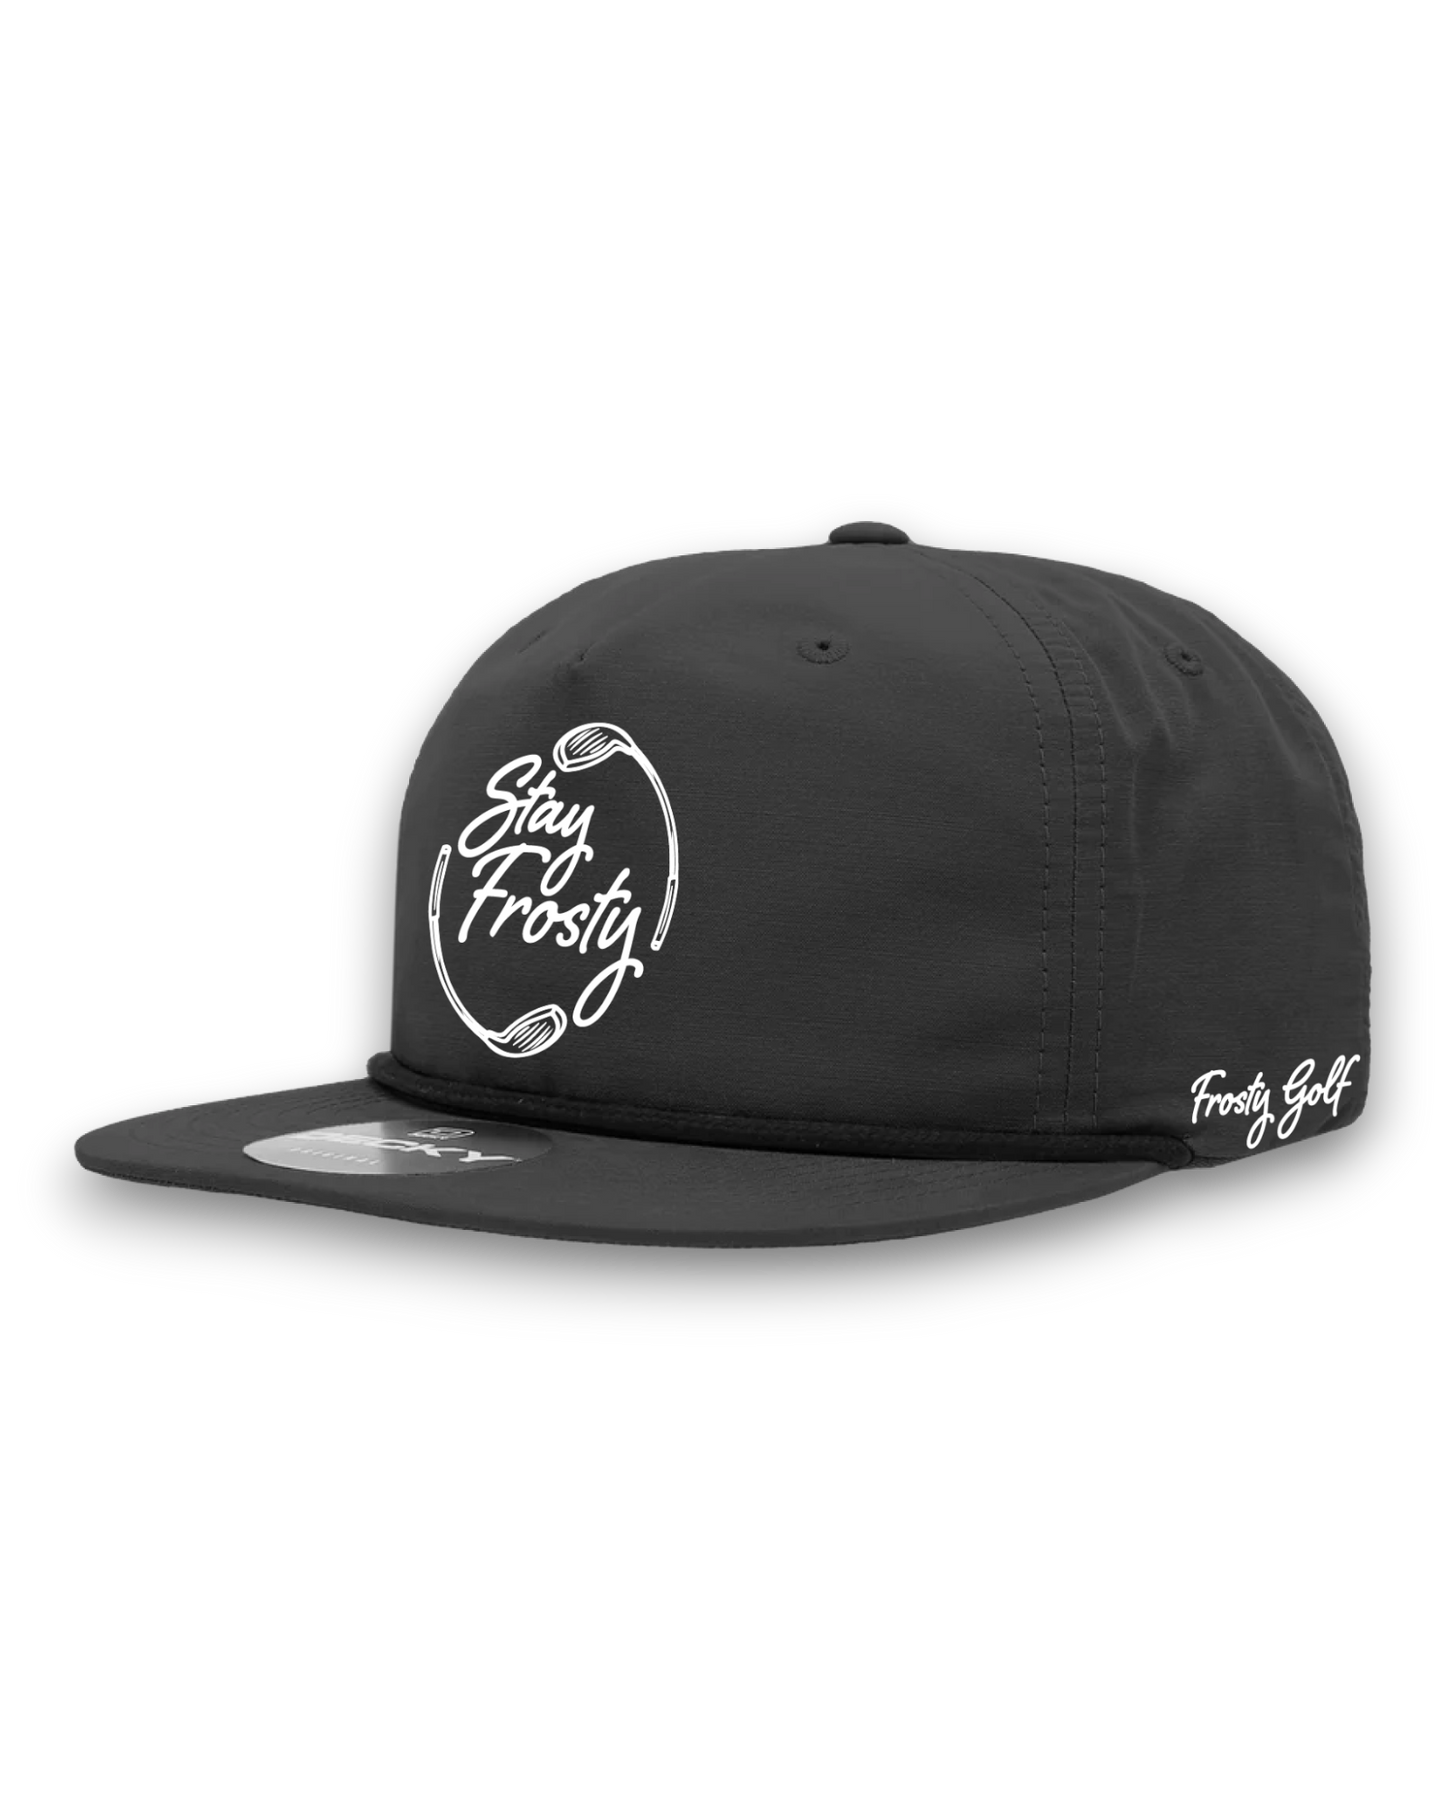 Stay Frosty - Water Resistant Camper Hat - Black/White